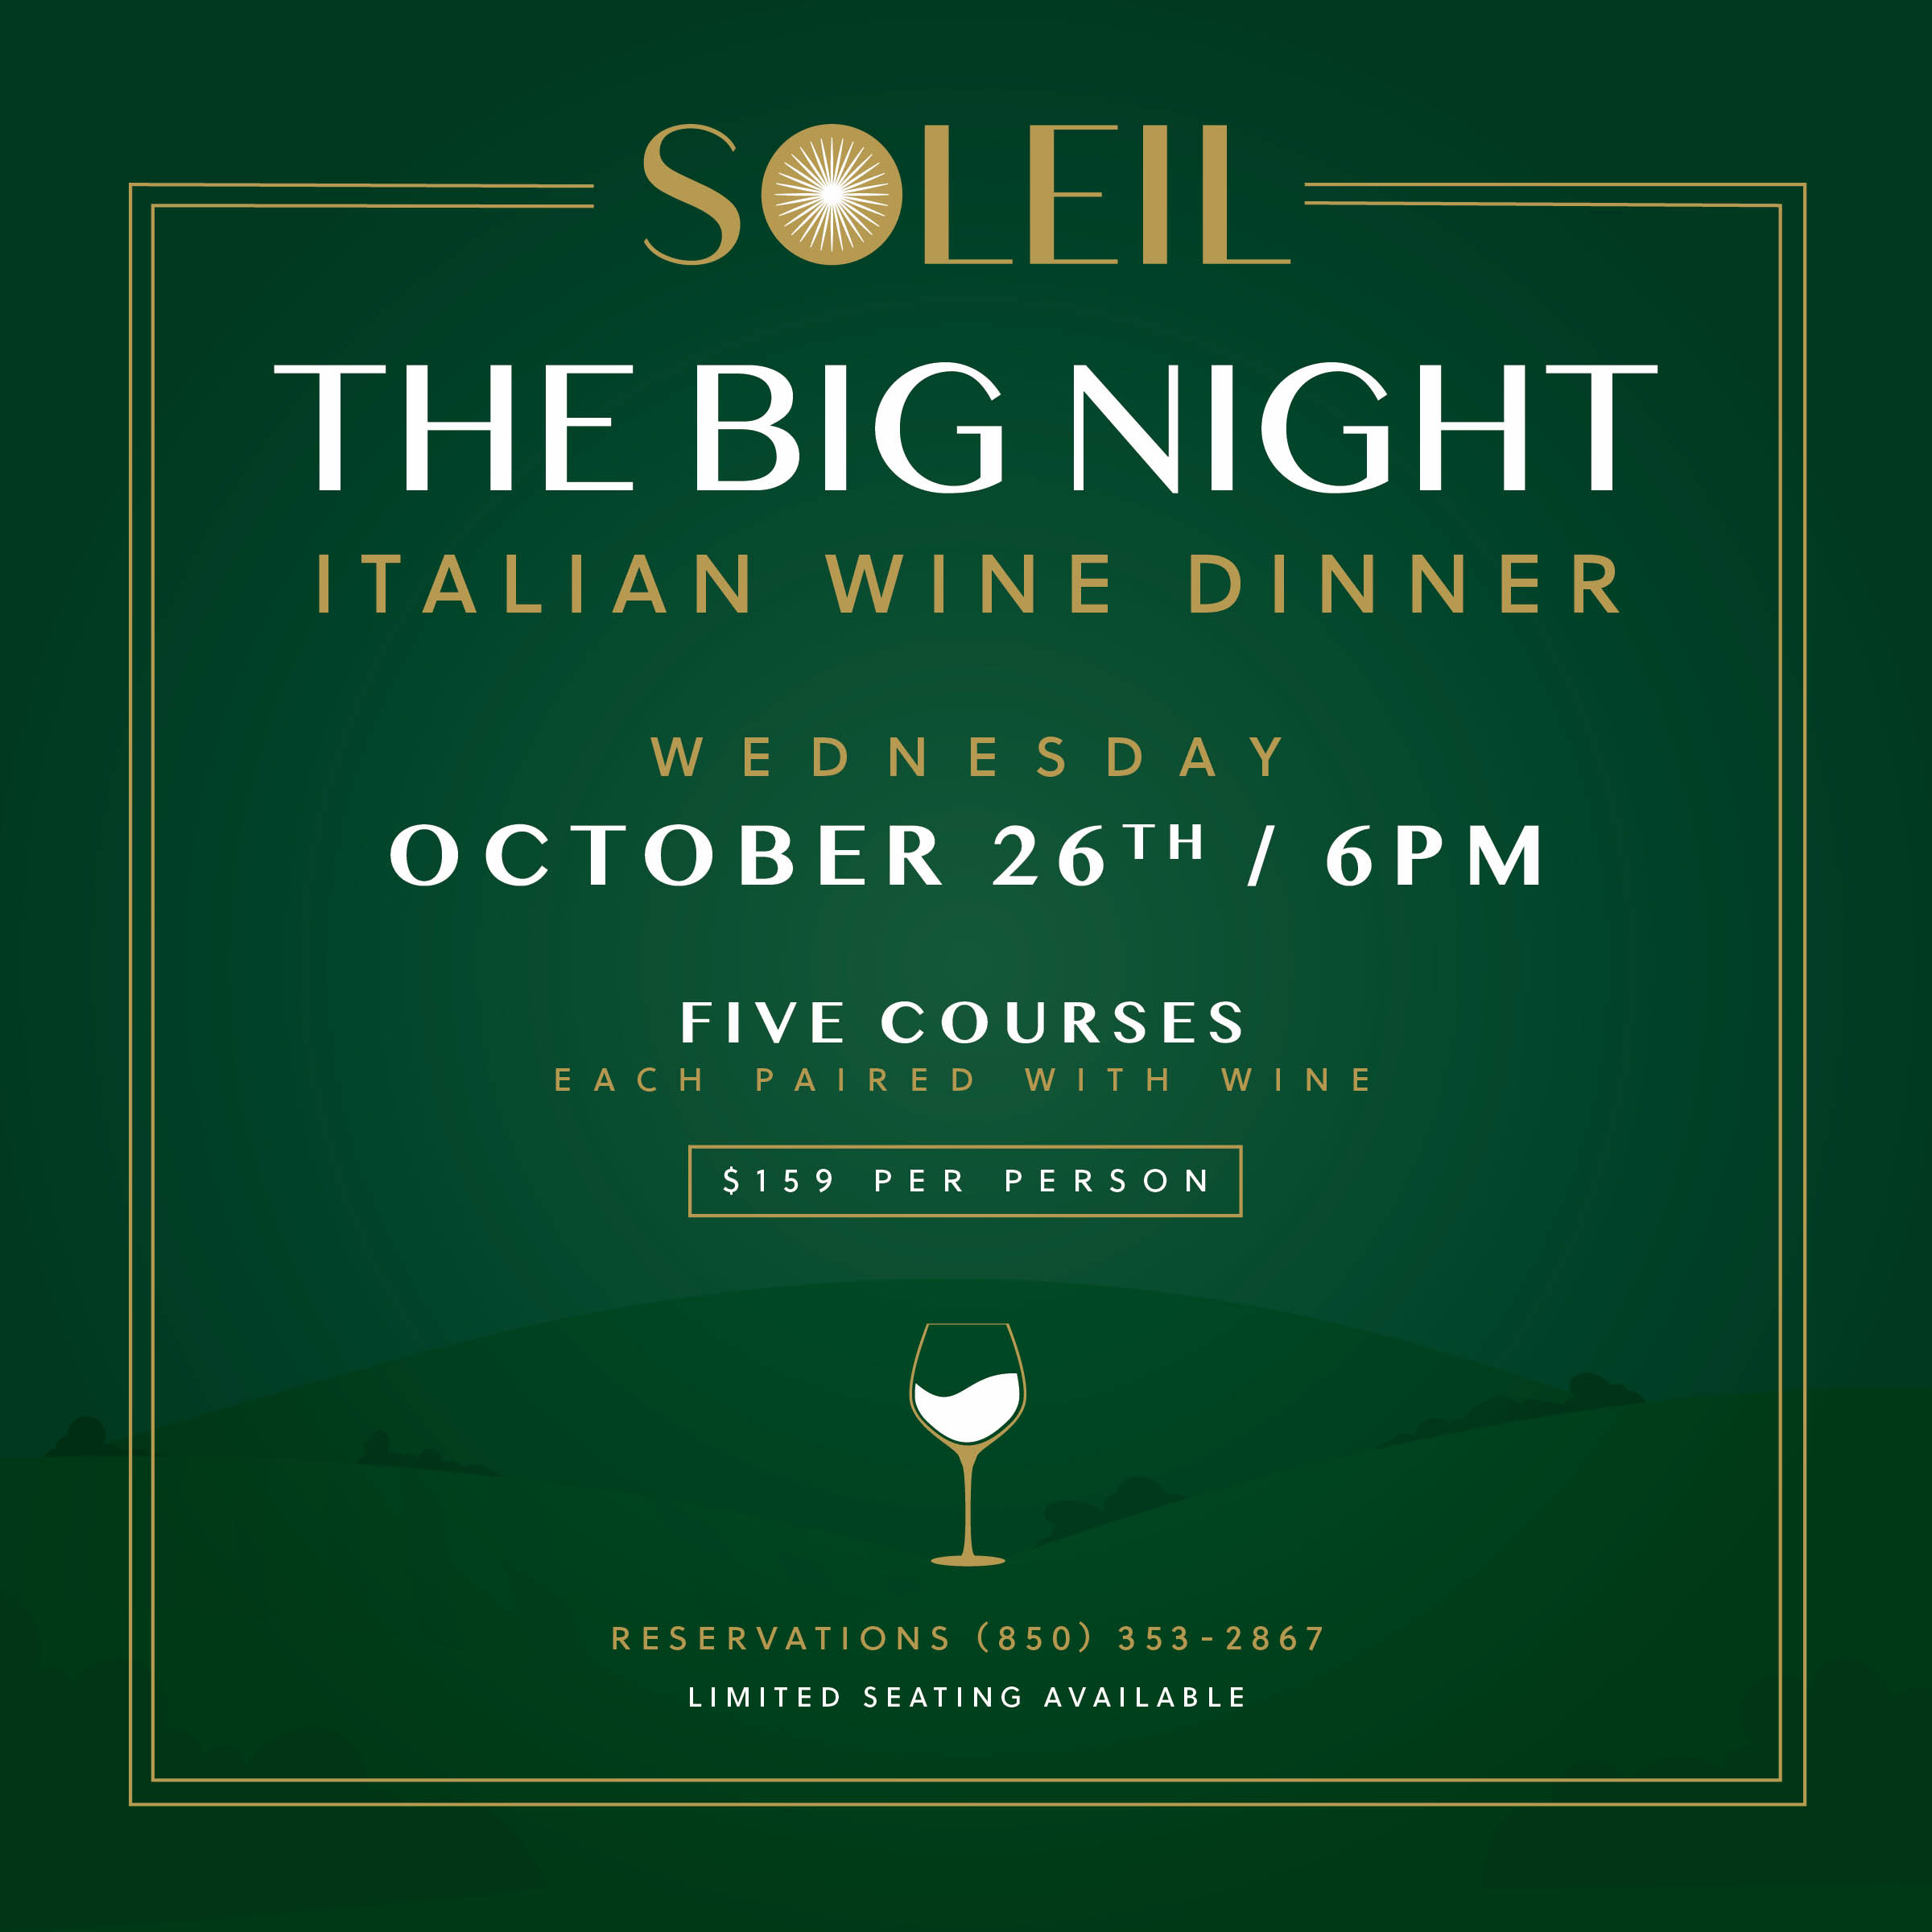 Soleil to Host The Big Night   An Italian Wine Dinner with Chef and Sommelier Michael Sichel